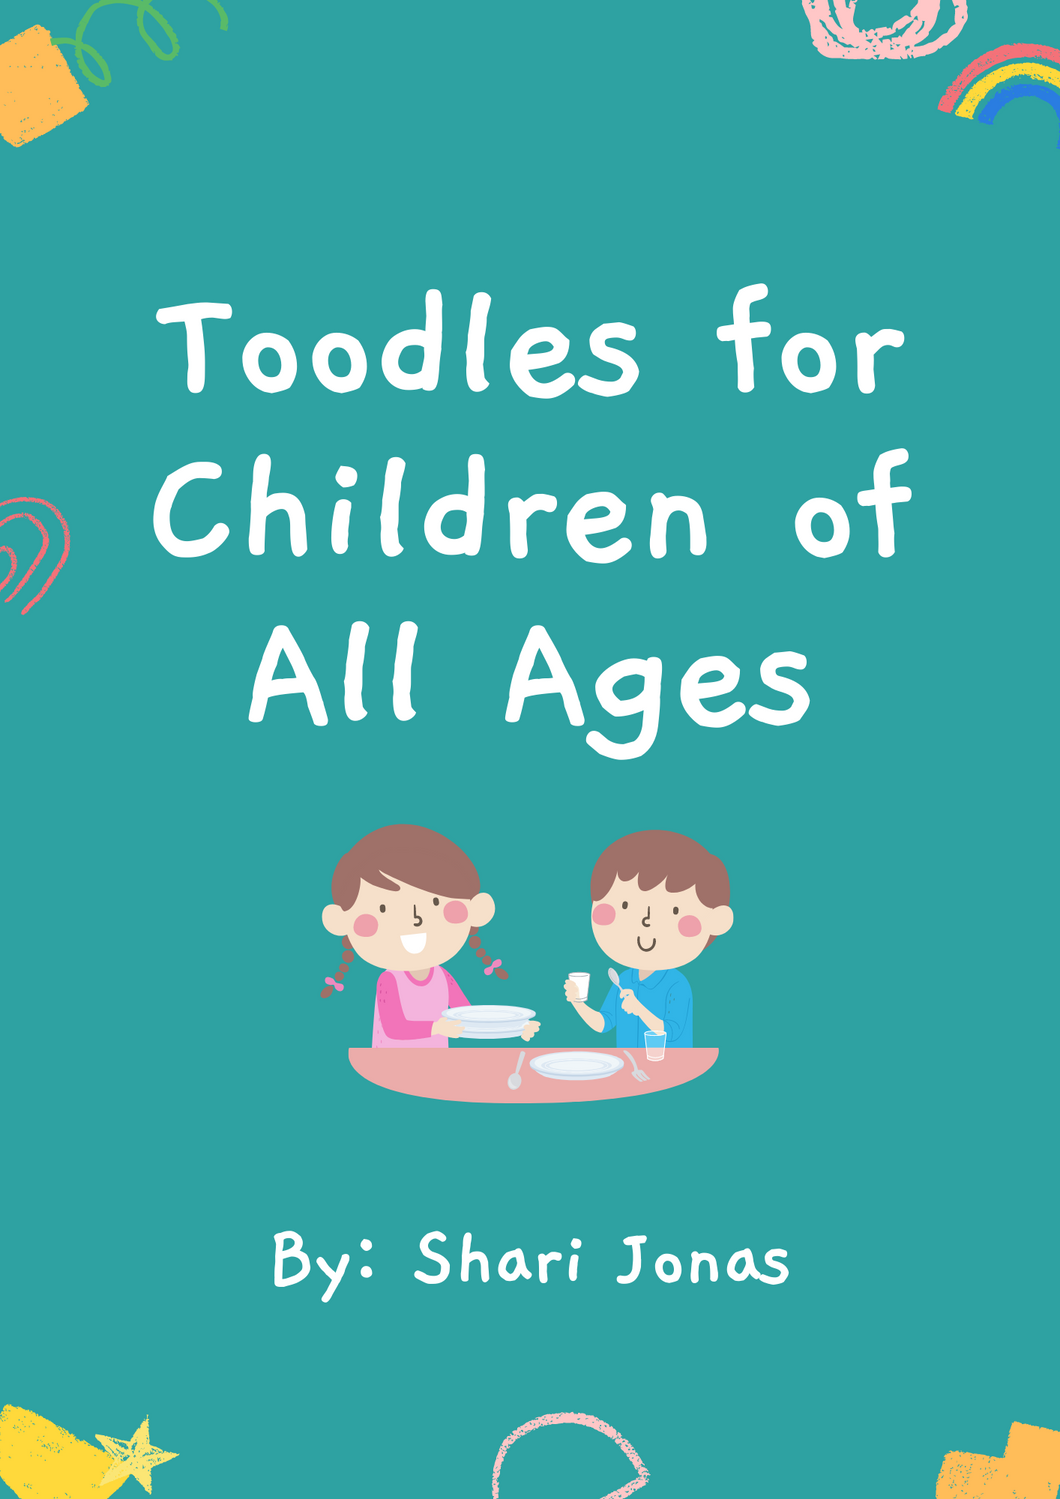 Toodles for Children of All Ages - INSTANT DOWNLOAD